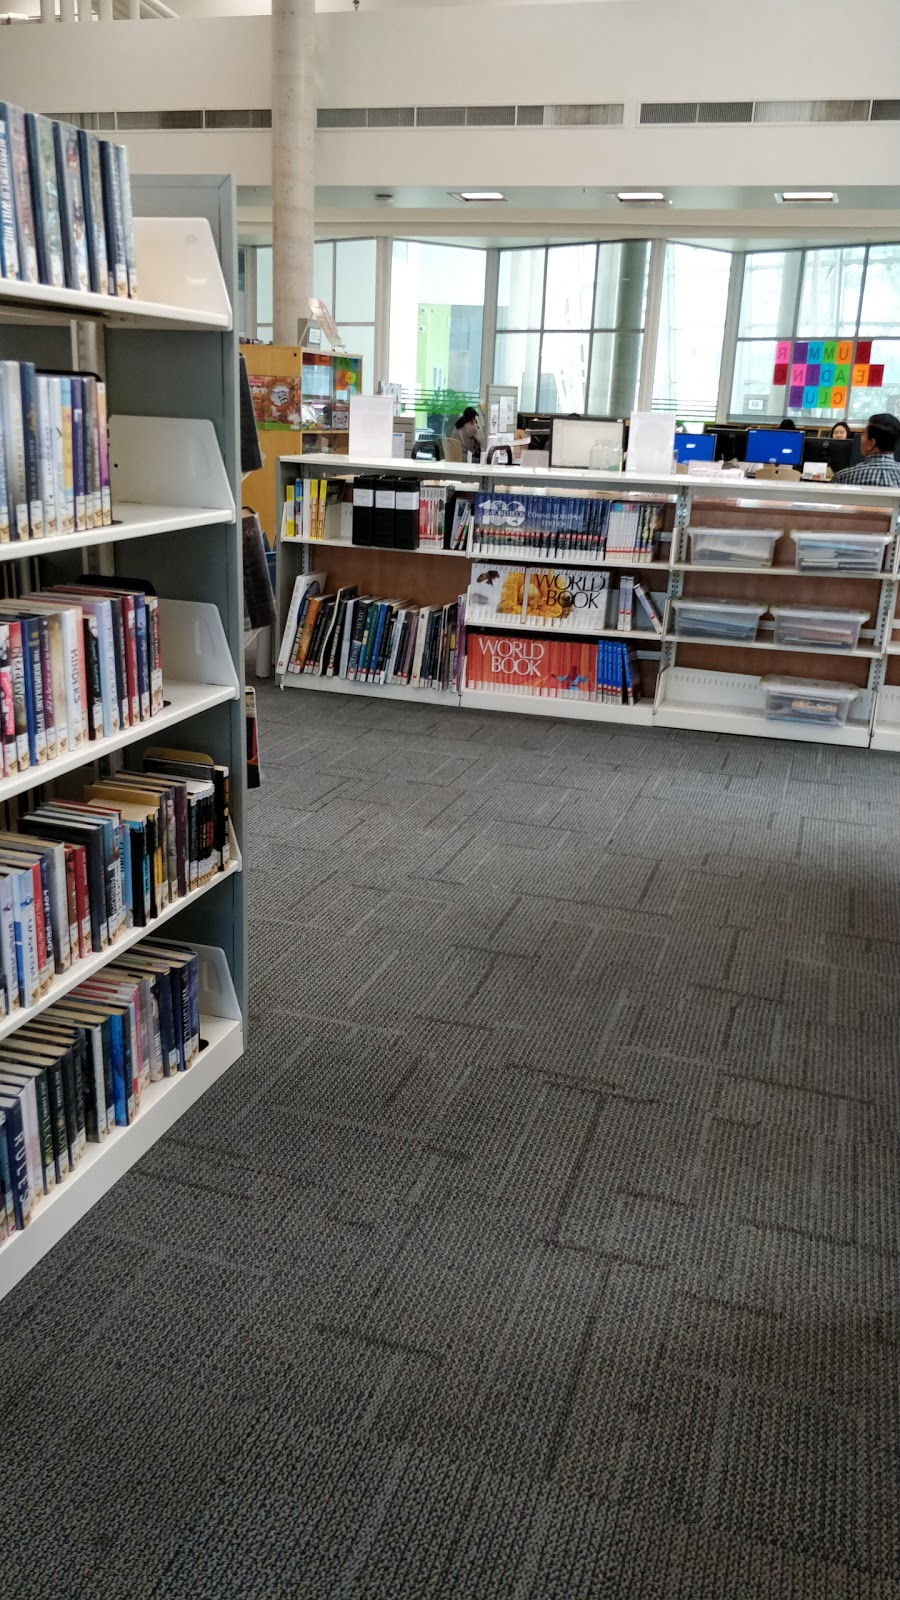 Surrey Libraries - Fleetwood Library | library | 15996 84 Ave, Surrey, BC V4N 0W1, Canada | 6045987340 OR +1 604-598-7340